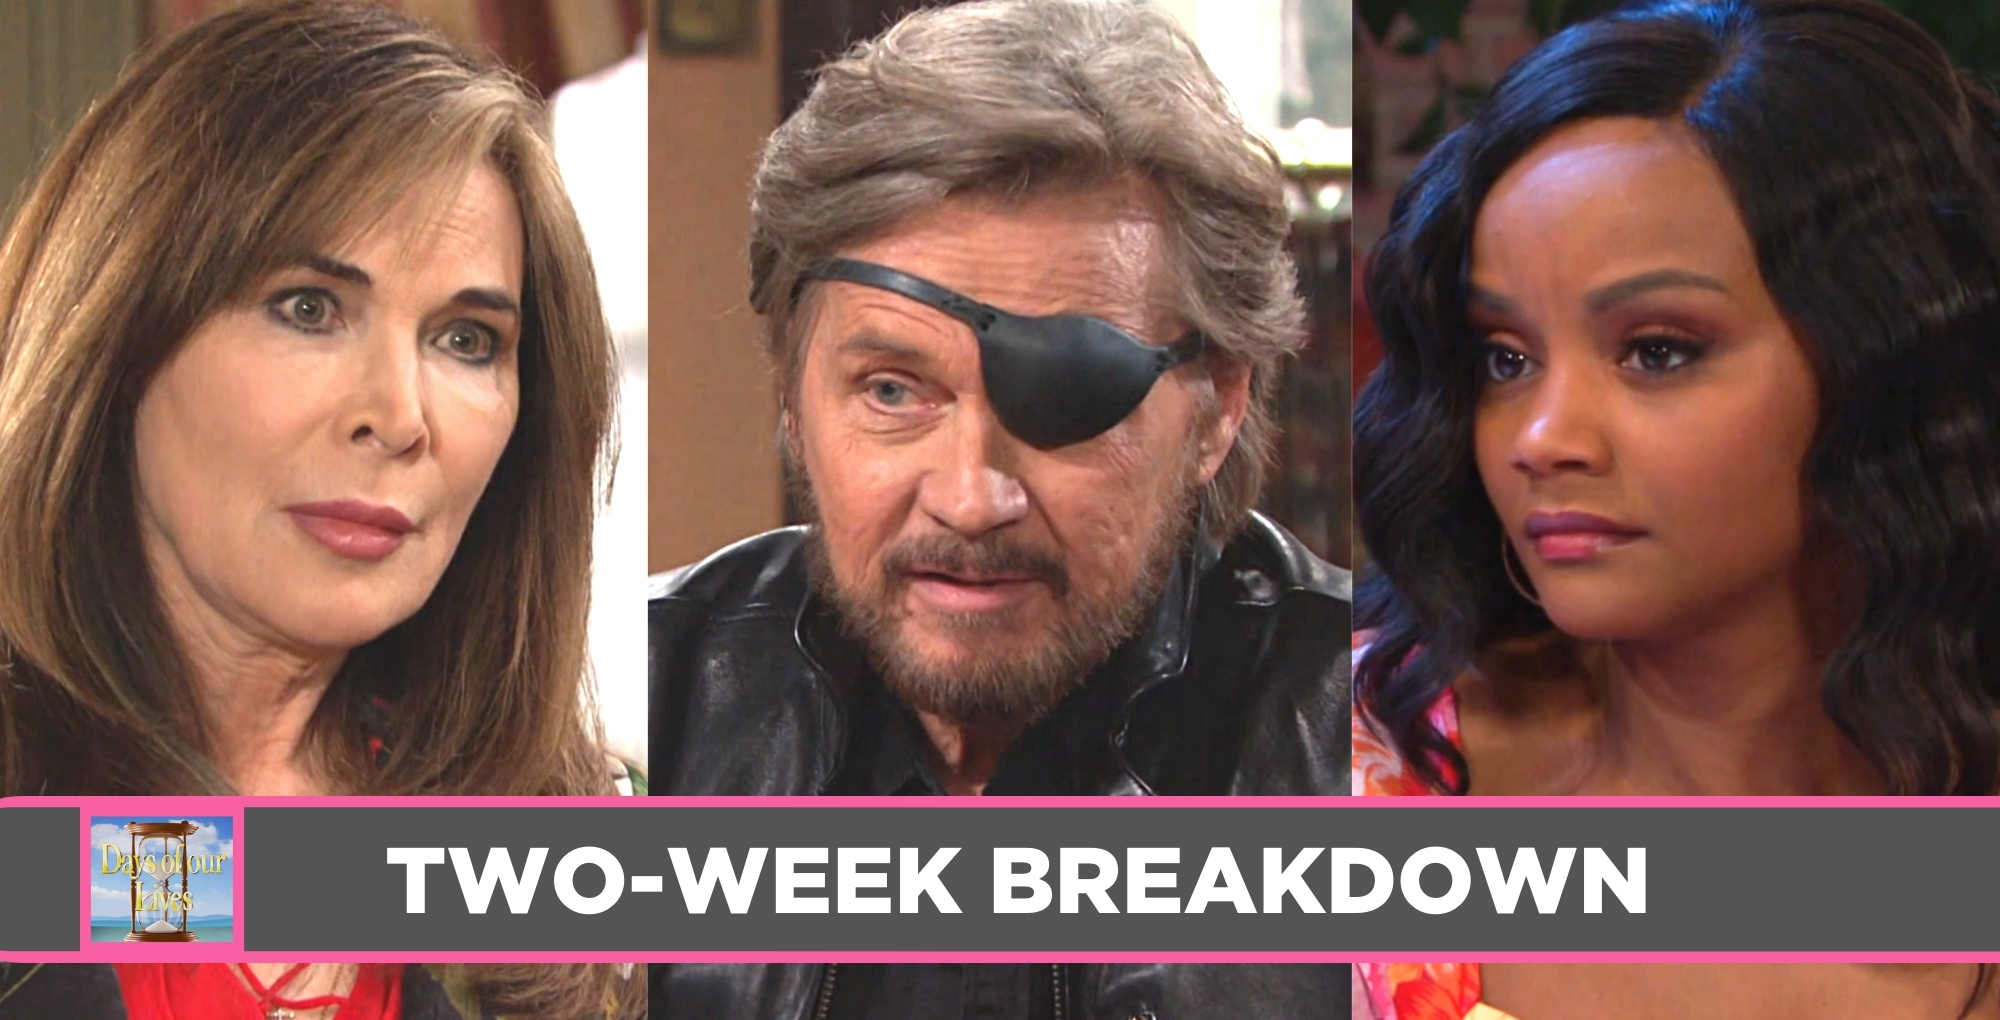 days of our lives spoilers two week breakdown kate, steve, and chanel.